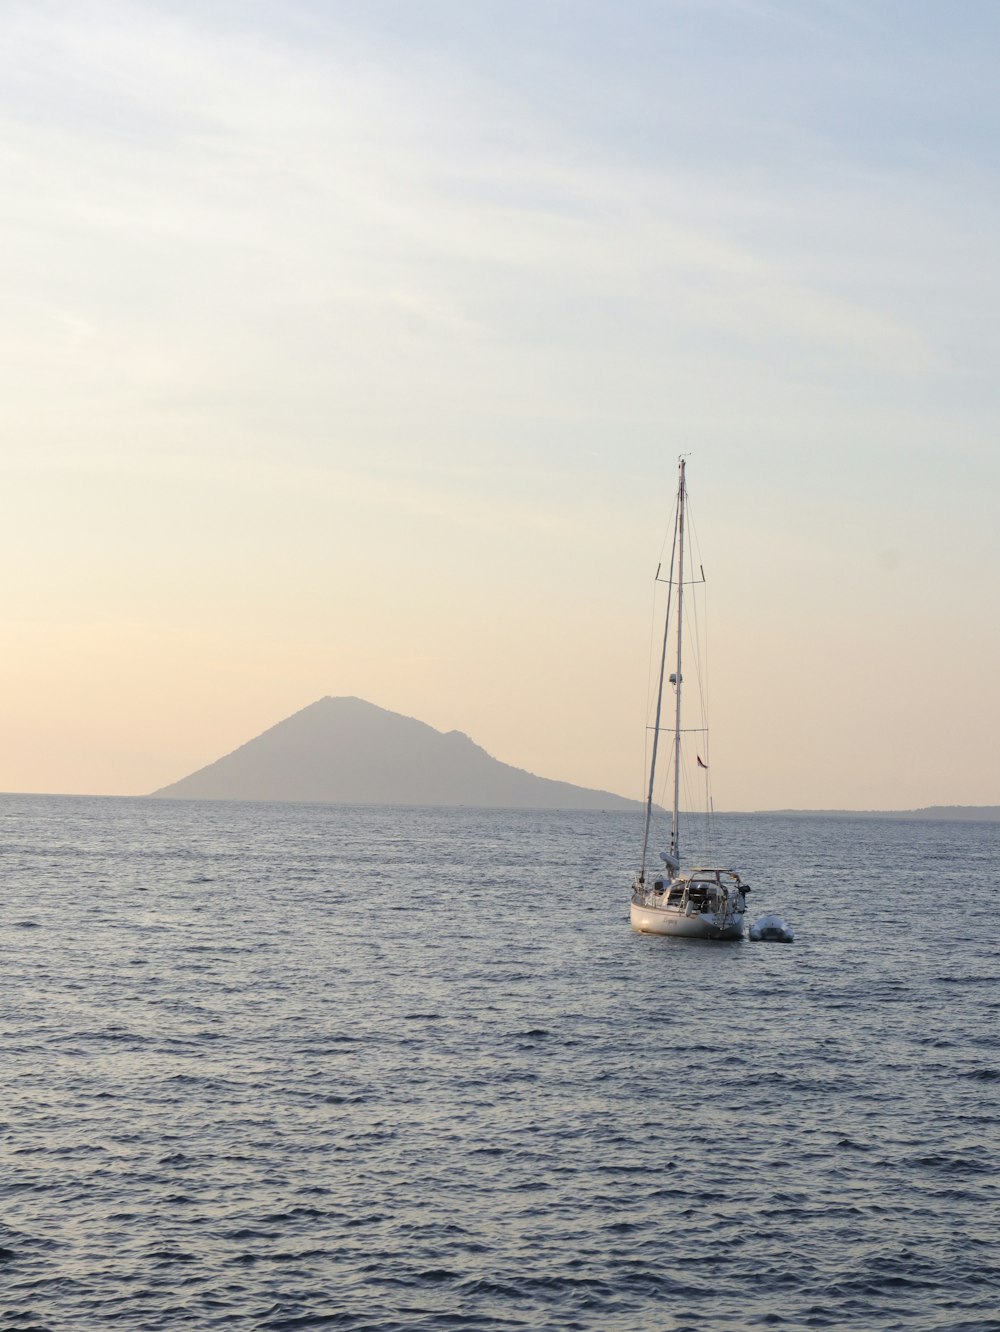 a sailboat in the ocean with a mountain in the background